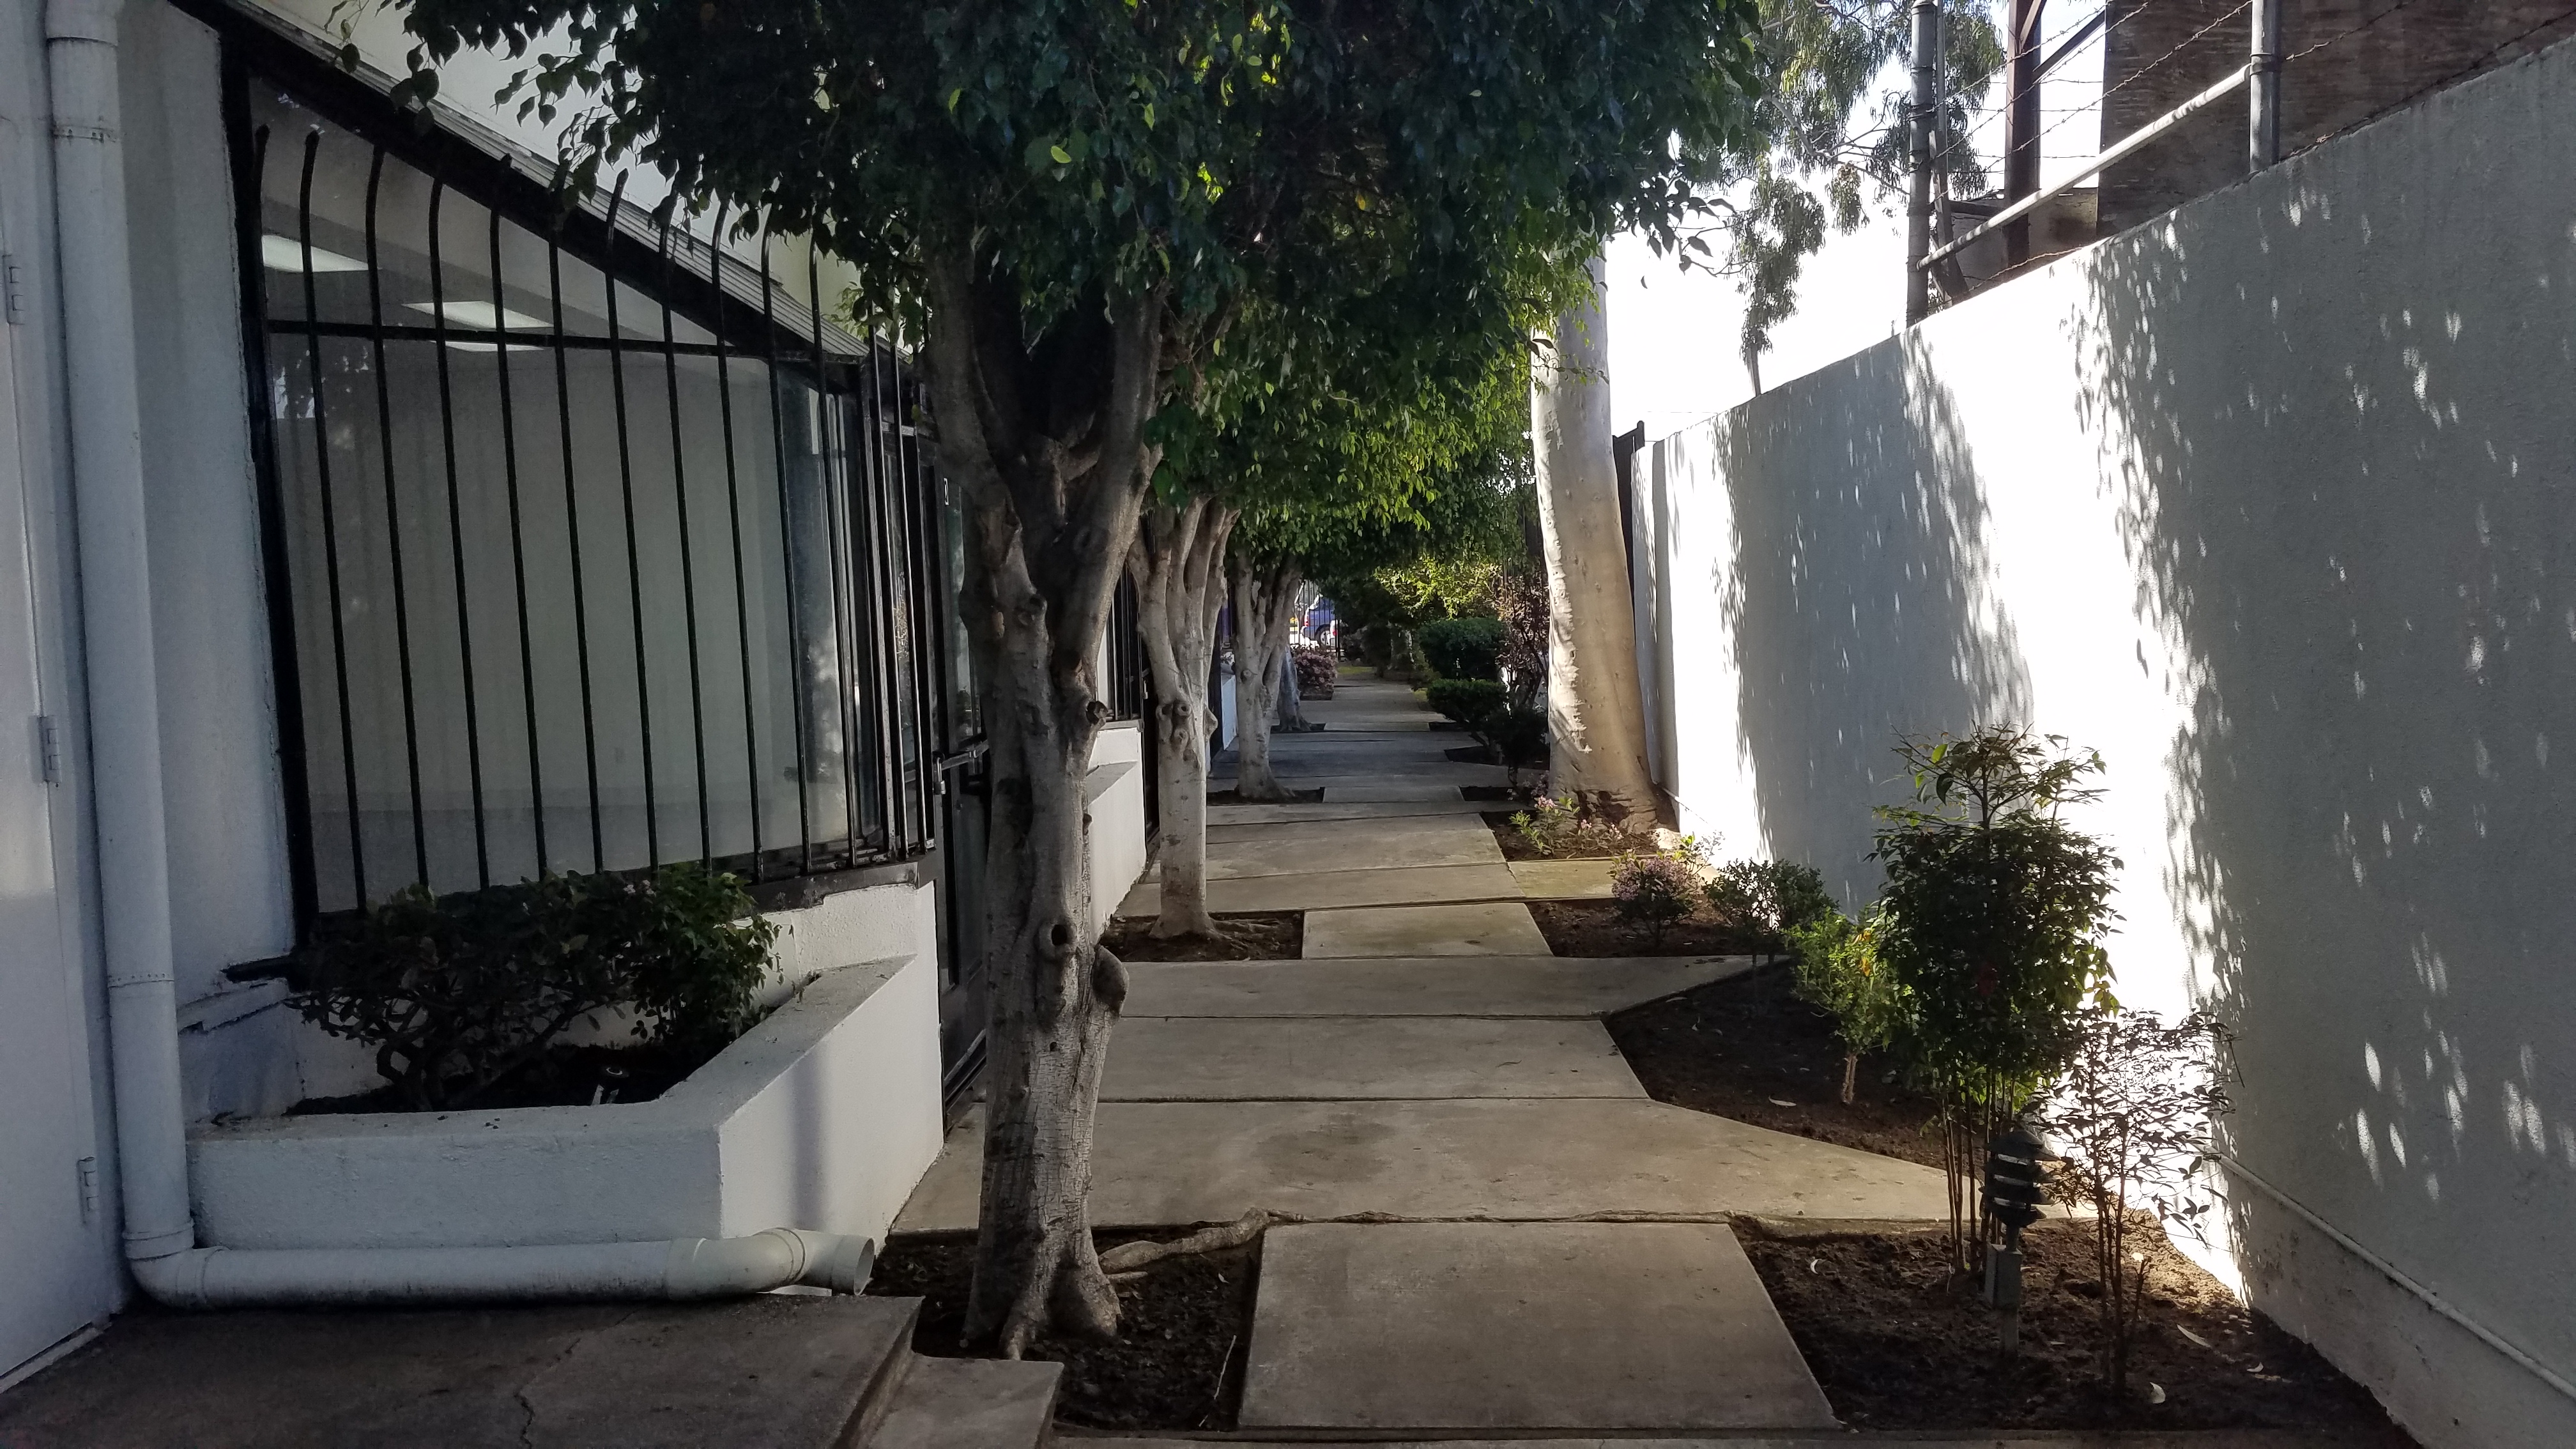 A sidewalk with trees and plants on it